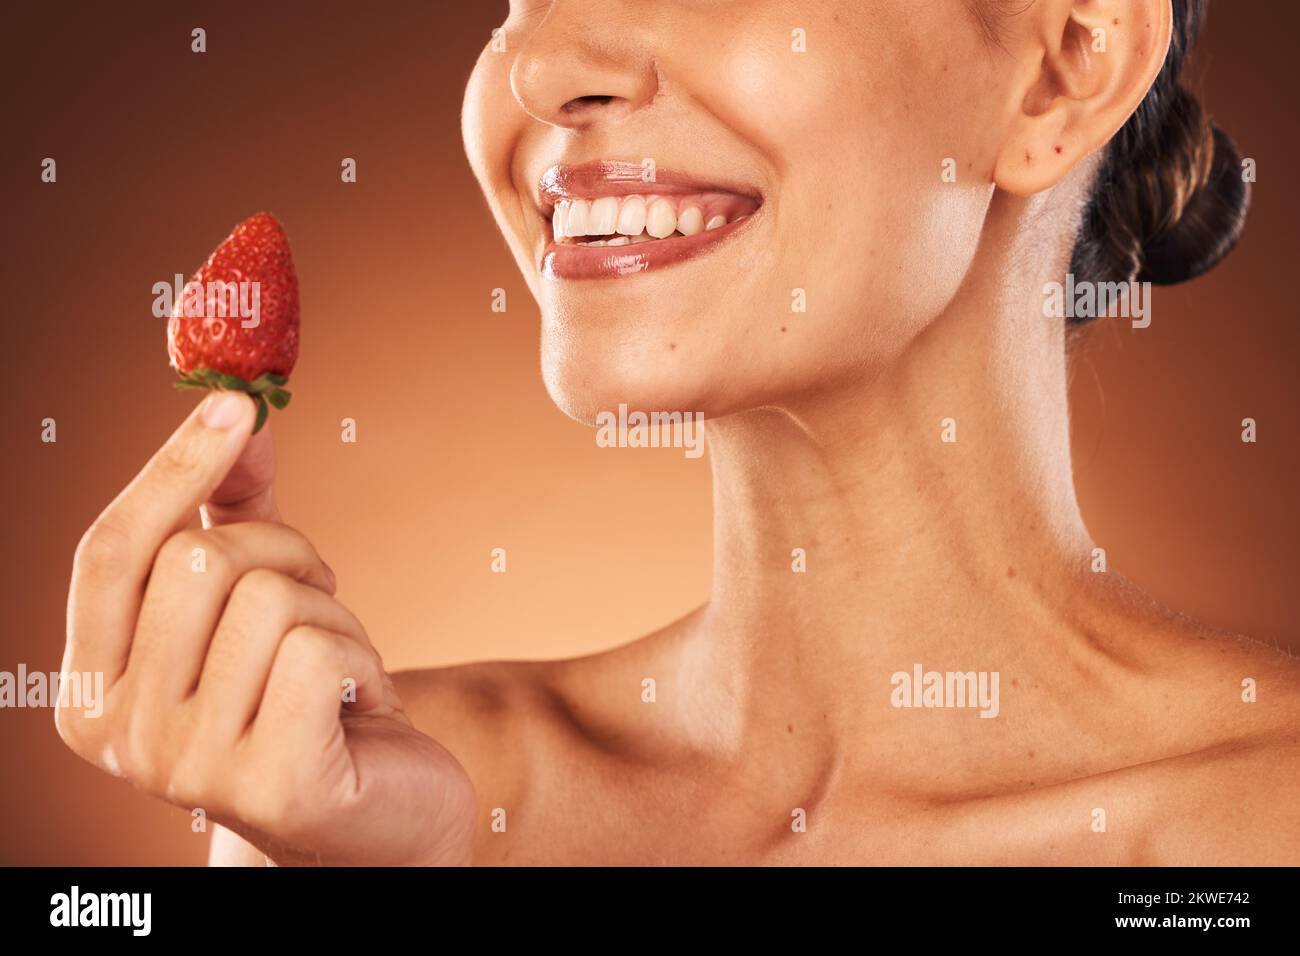 Strawberry, skincare and studio woman for beauty, cosmetics and lipstick color promotion, advertising or marketing. Smile, teeth and health model with Stock Photo